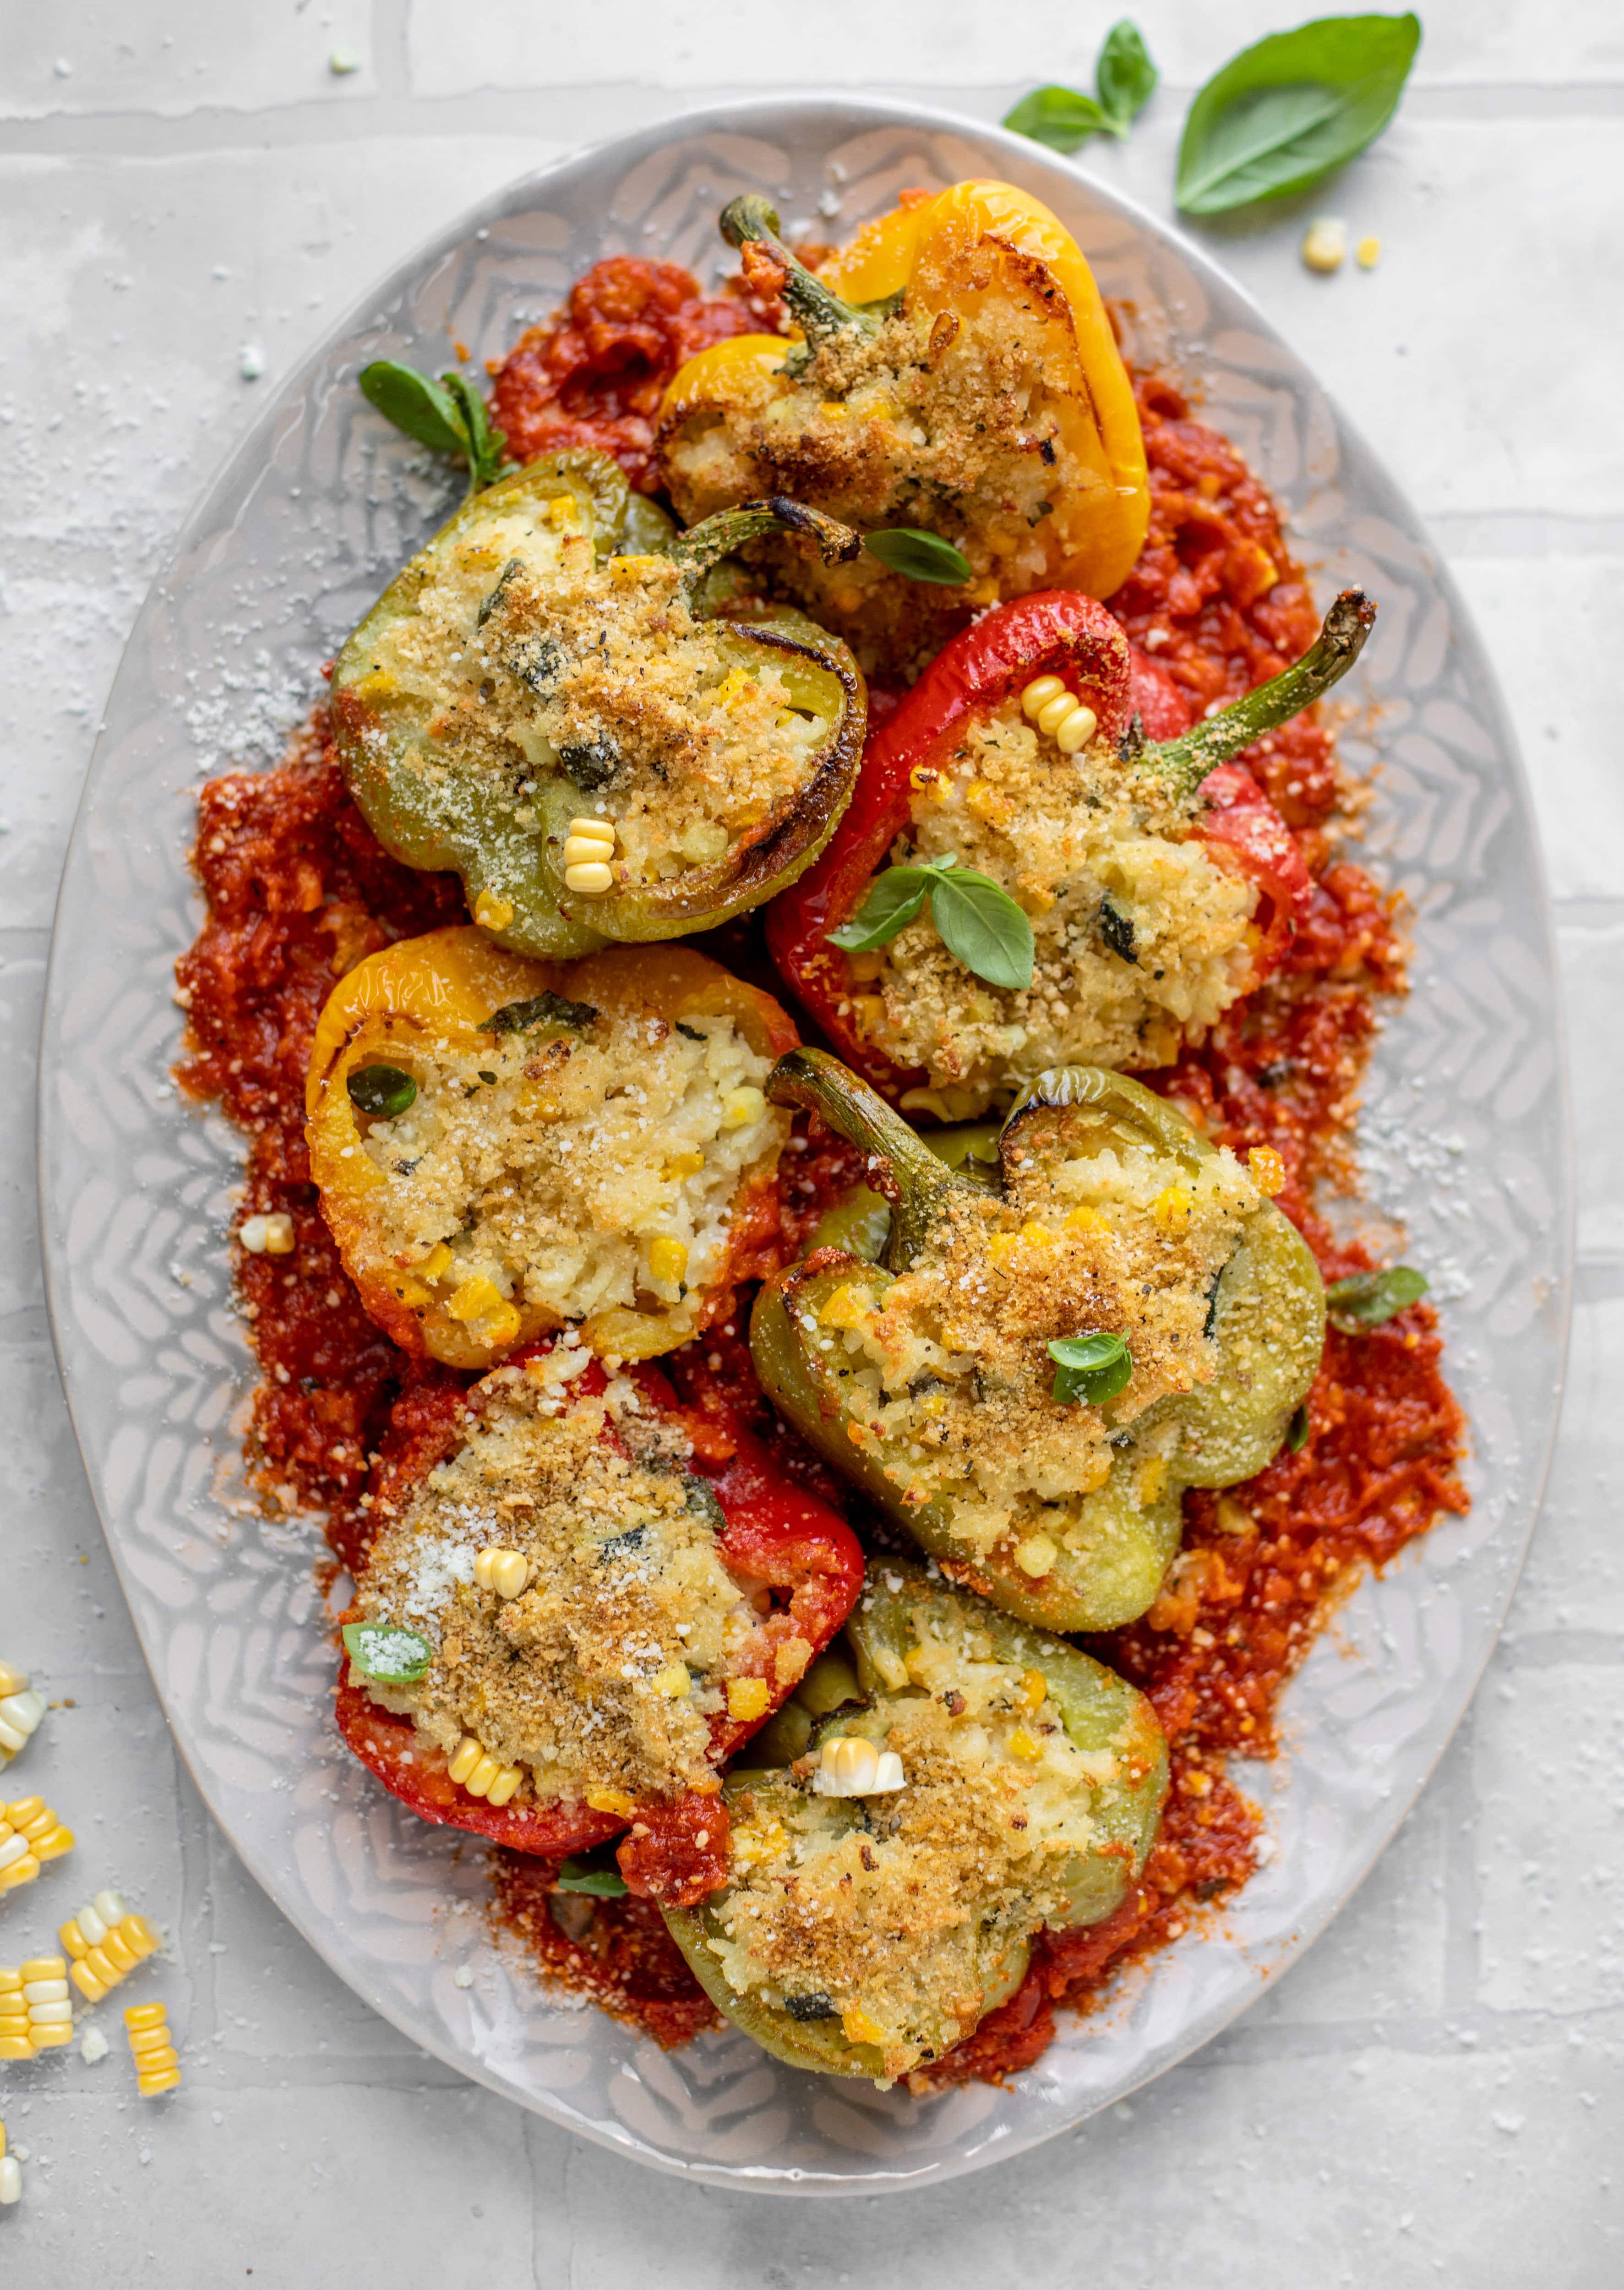 Risotto Stuffed Peppers - Summer Risotto Stuffed Peppers